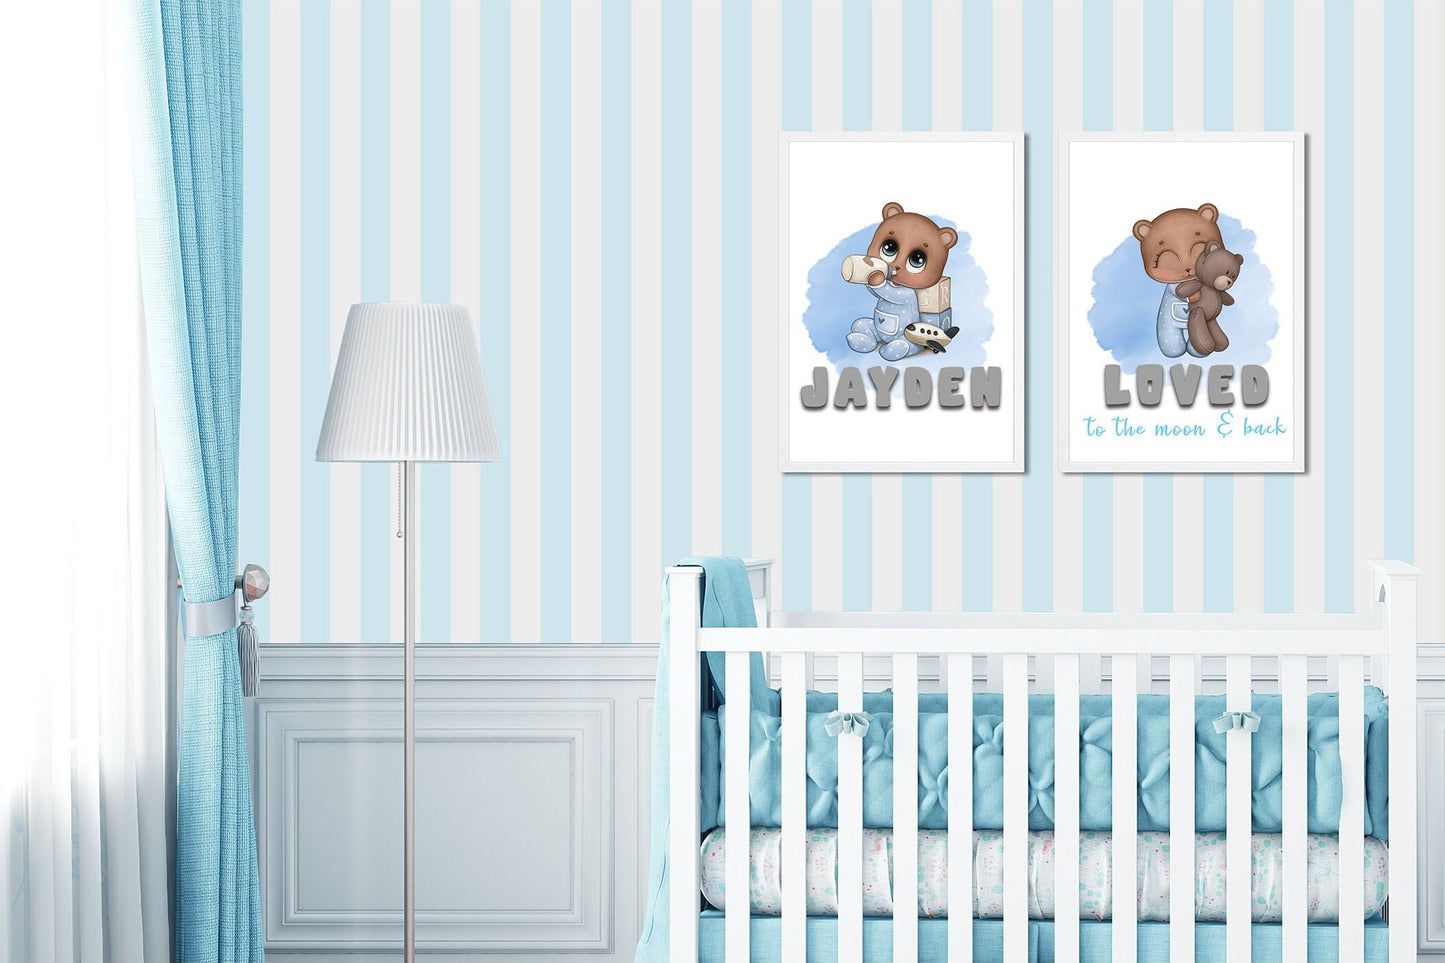 Bunny rabbit or teddy bear print collections, personalise with any message, available in 5 pastel colours and 14 characters to choose from